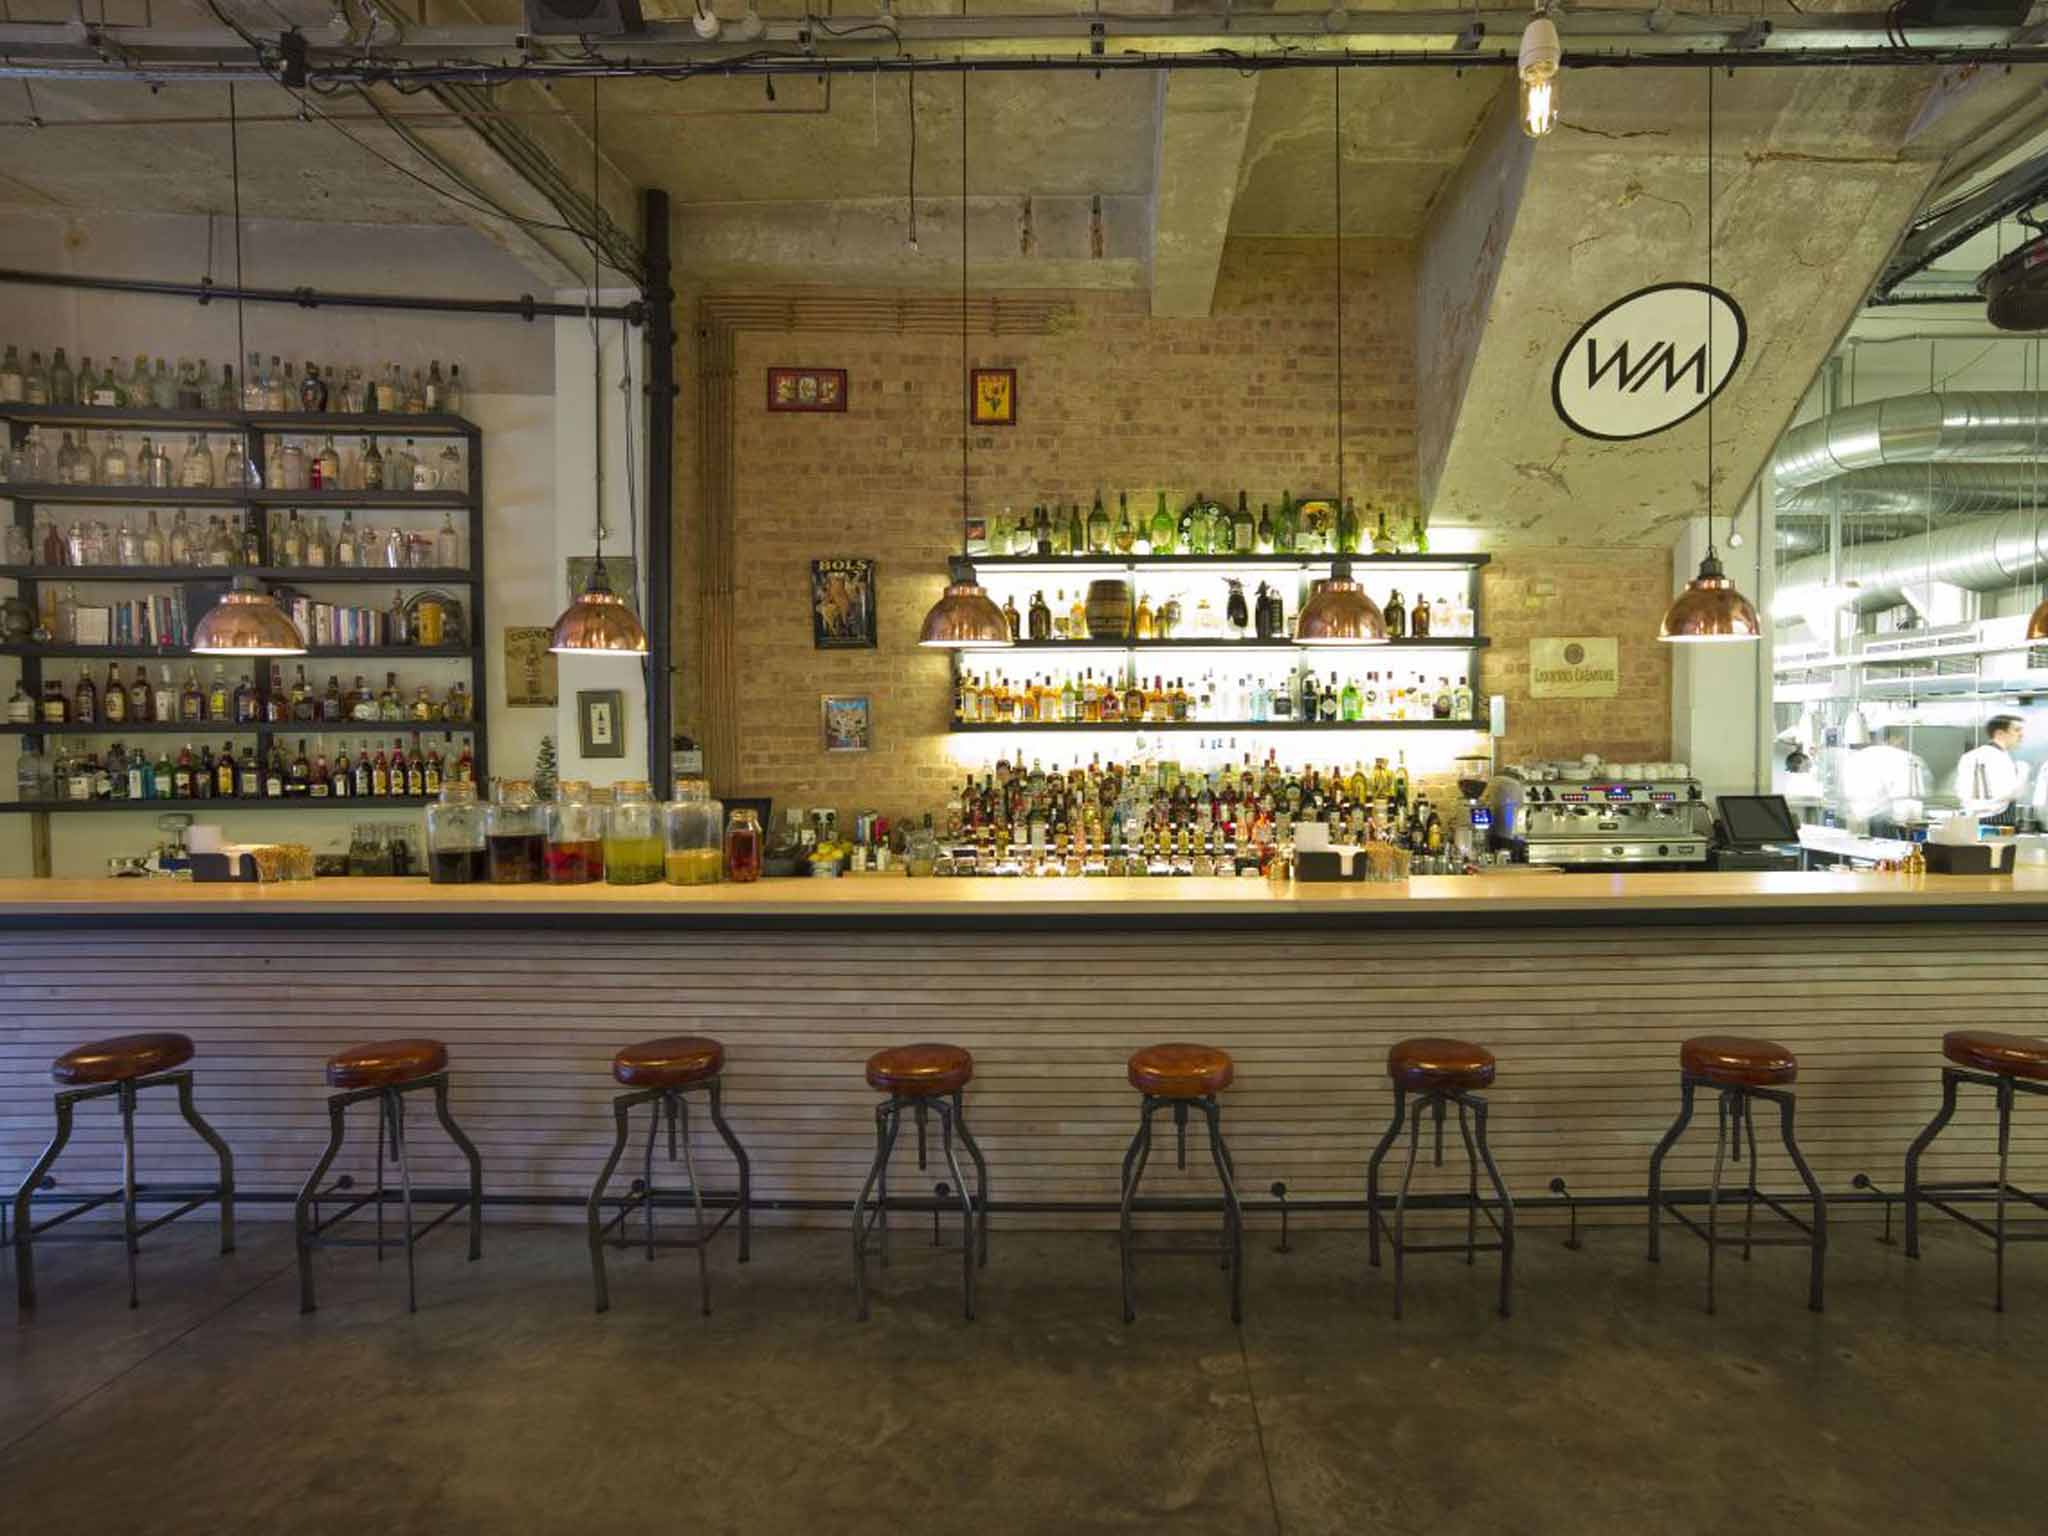 Great shakes: At bars such as this, the stage is set for a cocktail revolution